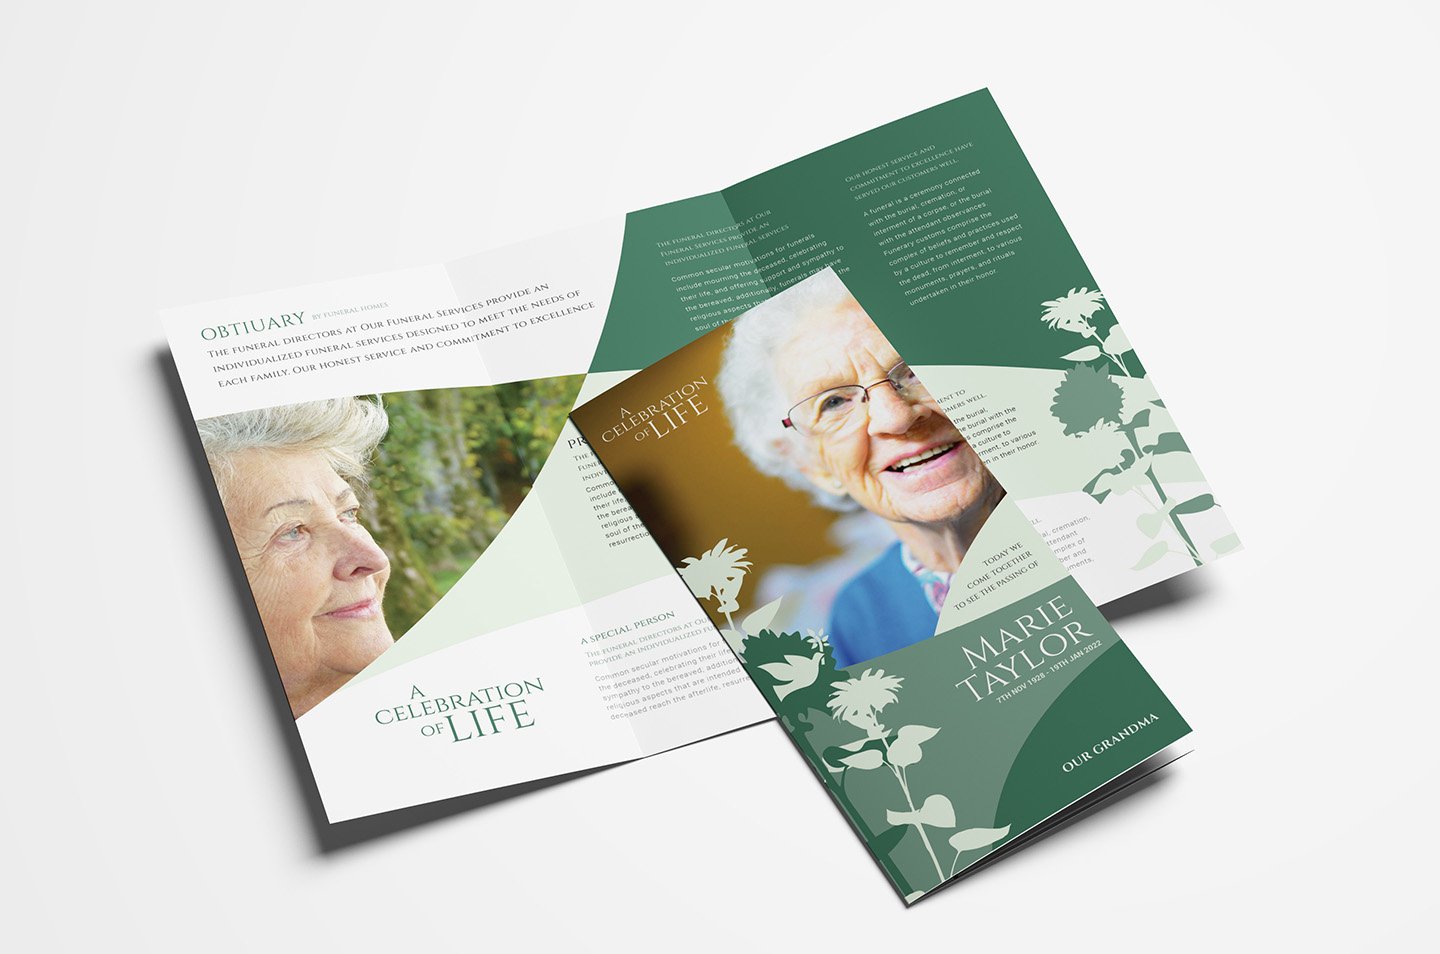 Funeral Service Trifold Brochure cover image.